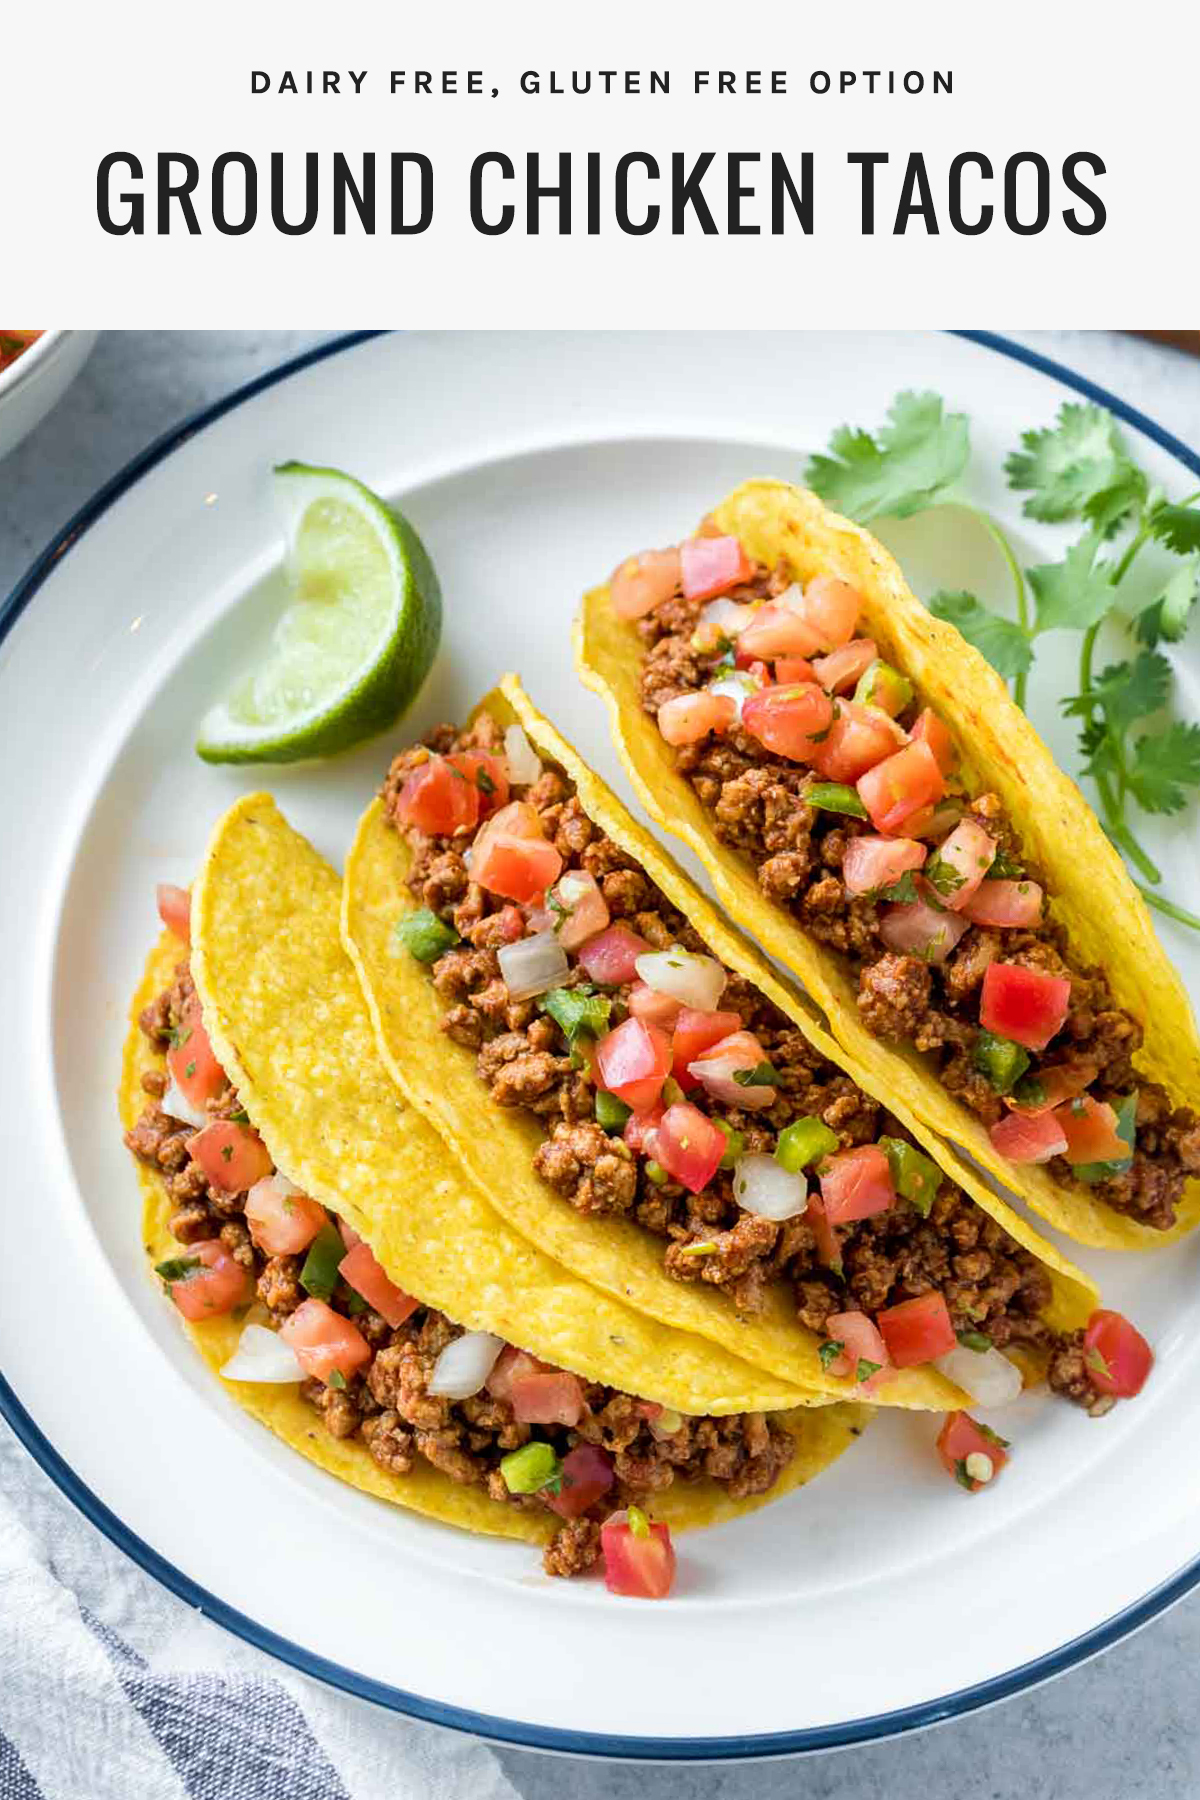 Ground Chicken Tacos Recipe (Dairy Free, Gluten Free) - Simply Whisked